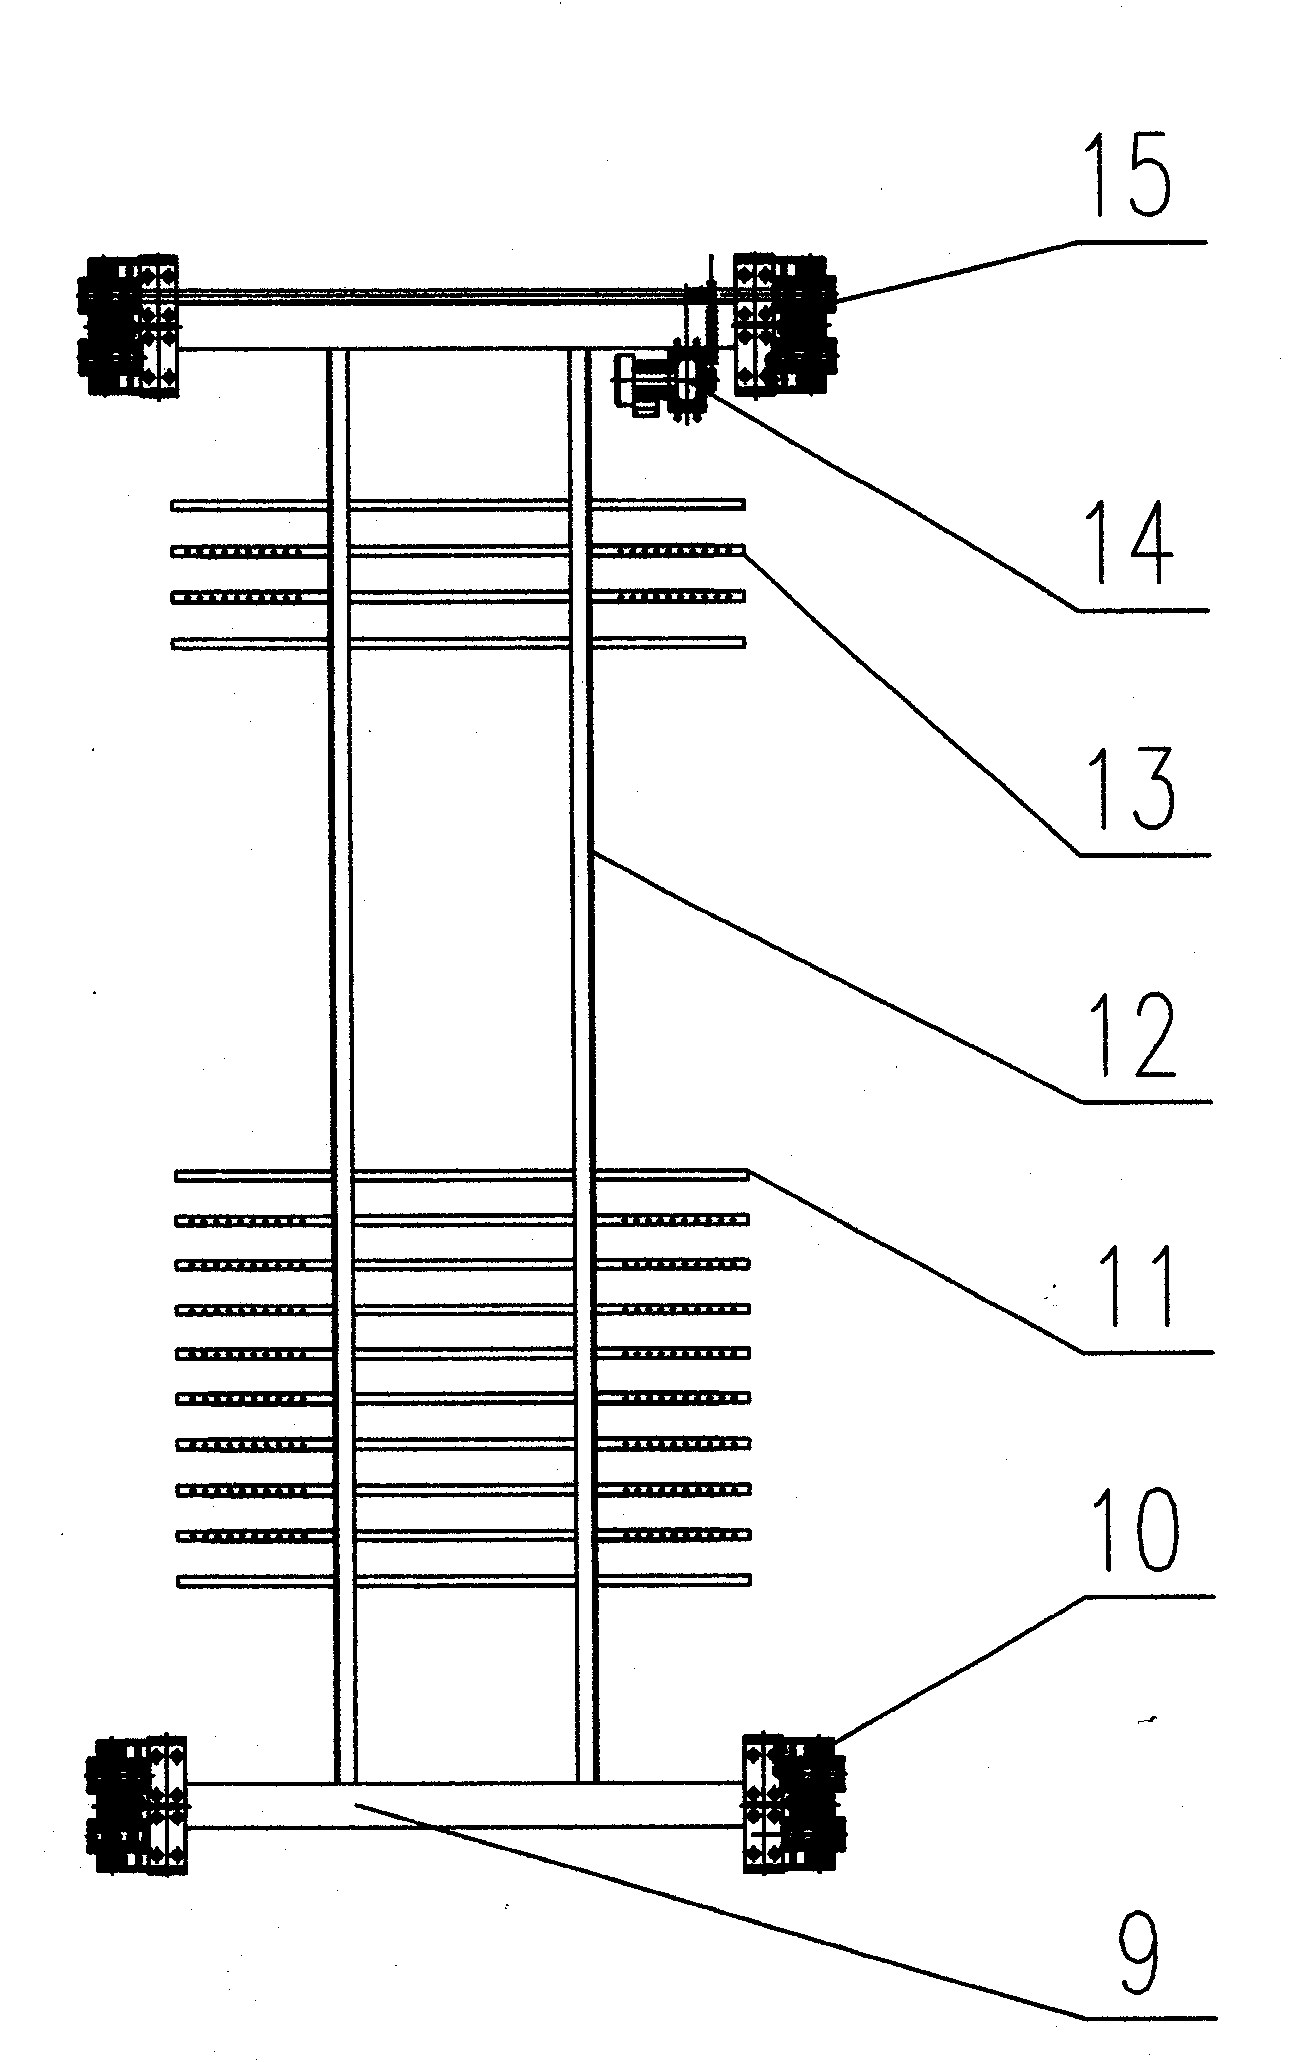 Longitudinal connected comb-tooth-type vertical lifting parking equipment